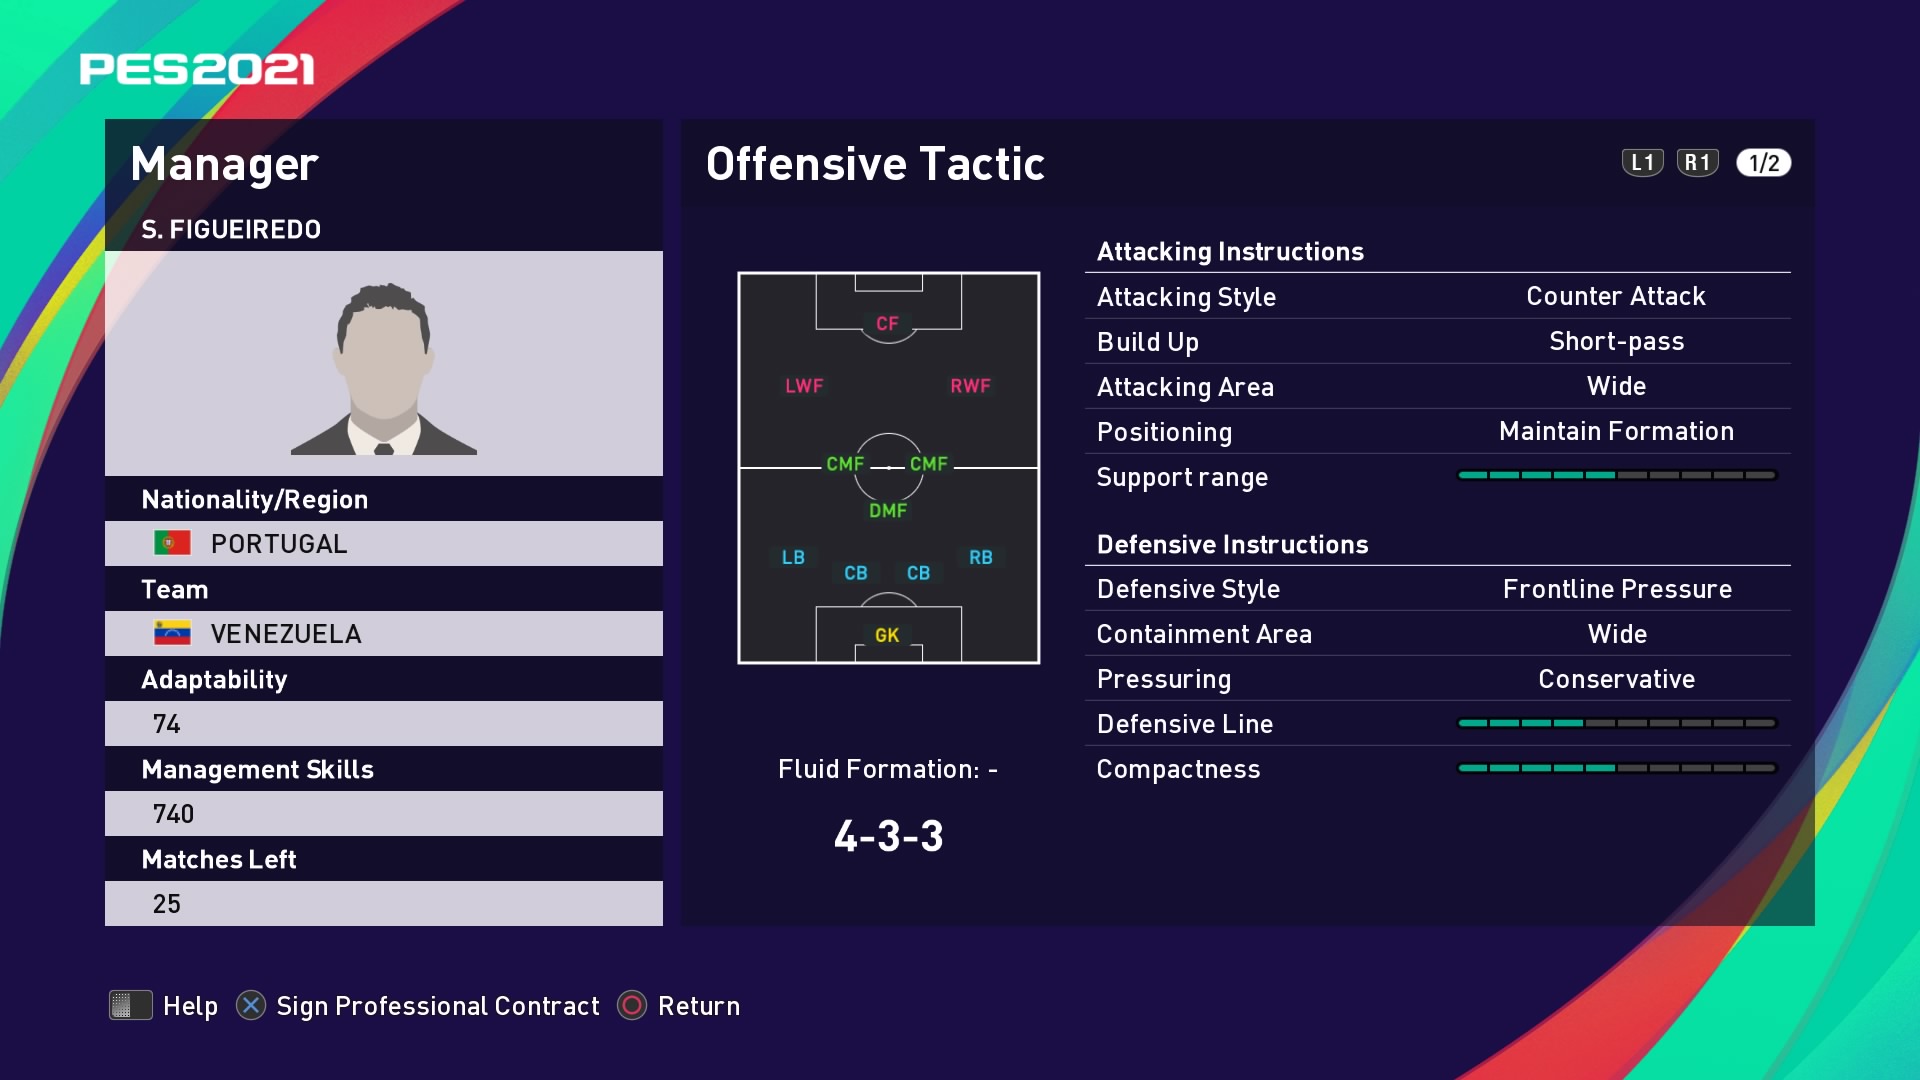 S. Figueiredo (José Peseiro) Offensive Tactic in PES 2021 myClub